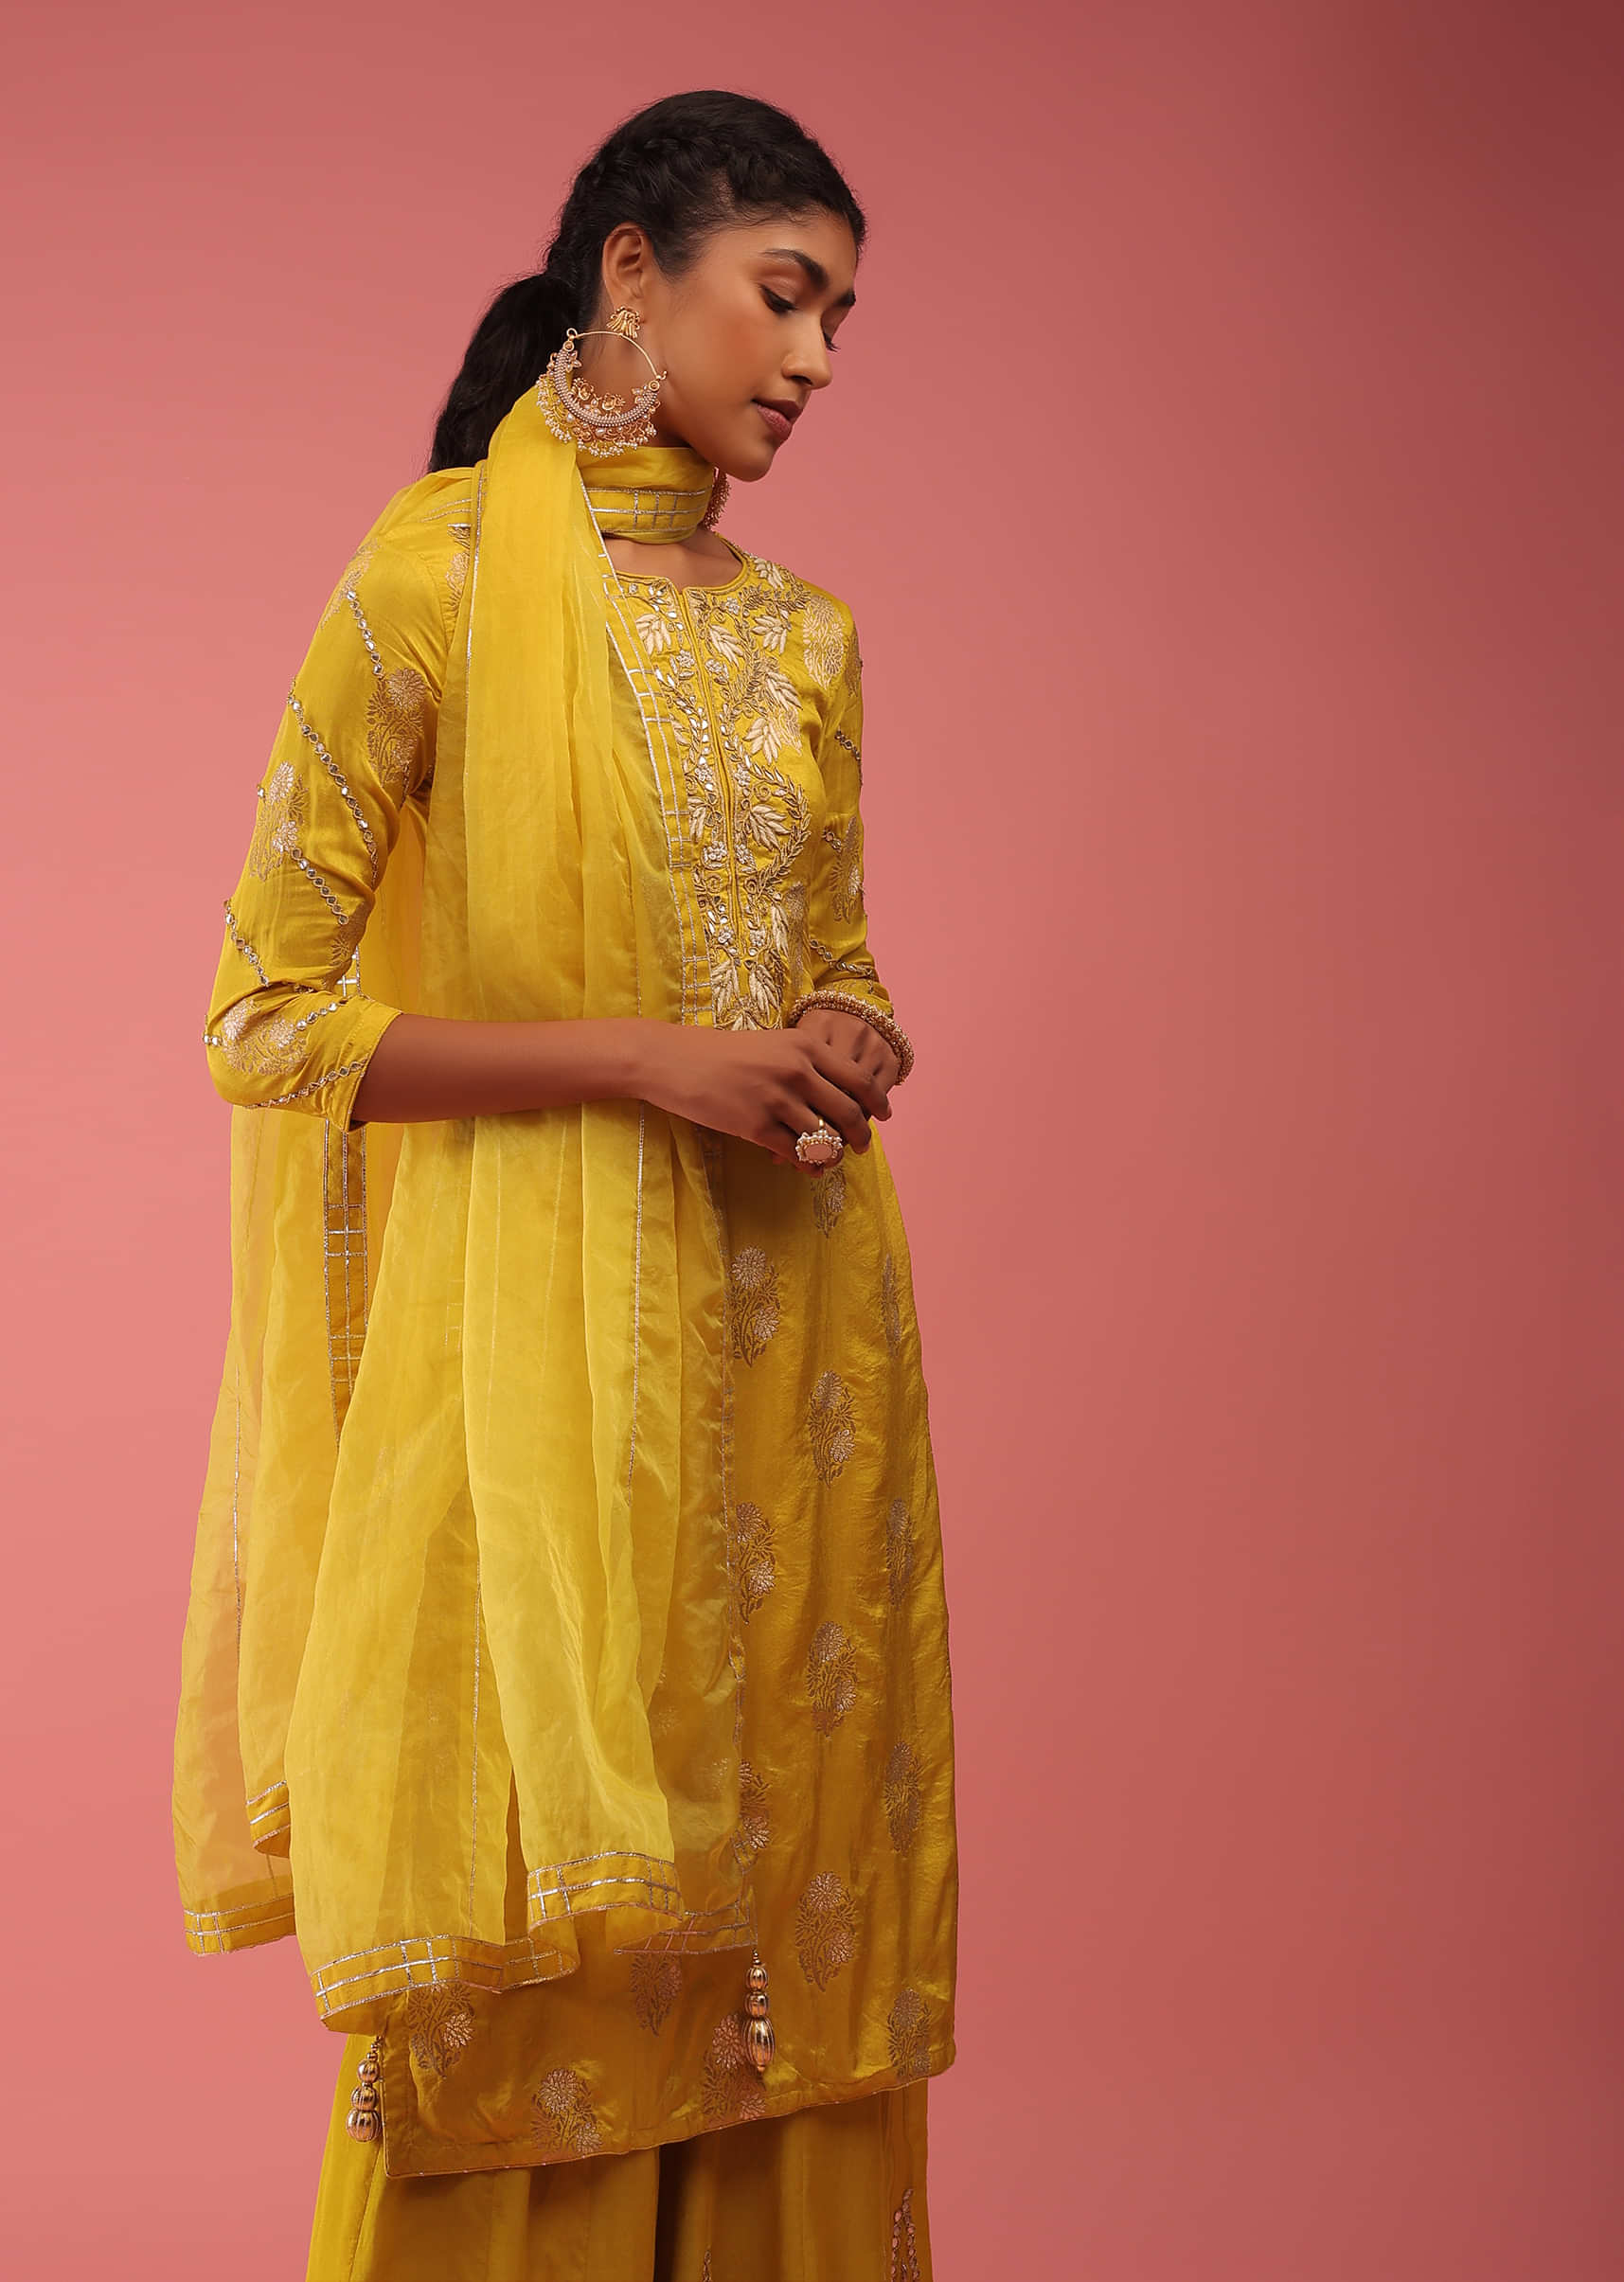 Freesia Yellow Sharara Suit In Golden Zari Embroidery, Crafted In Organza With Embroidery 3/4Th Sleeves